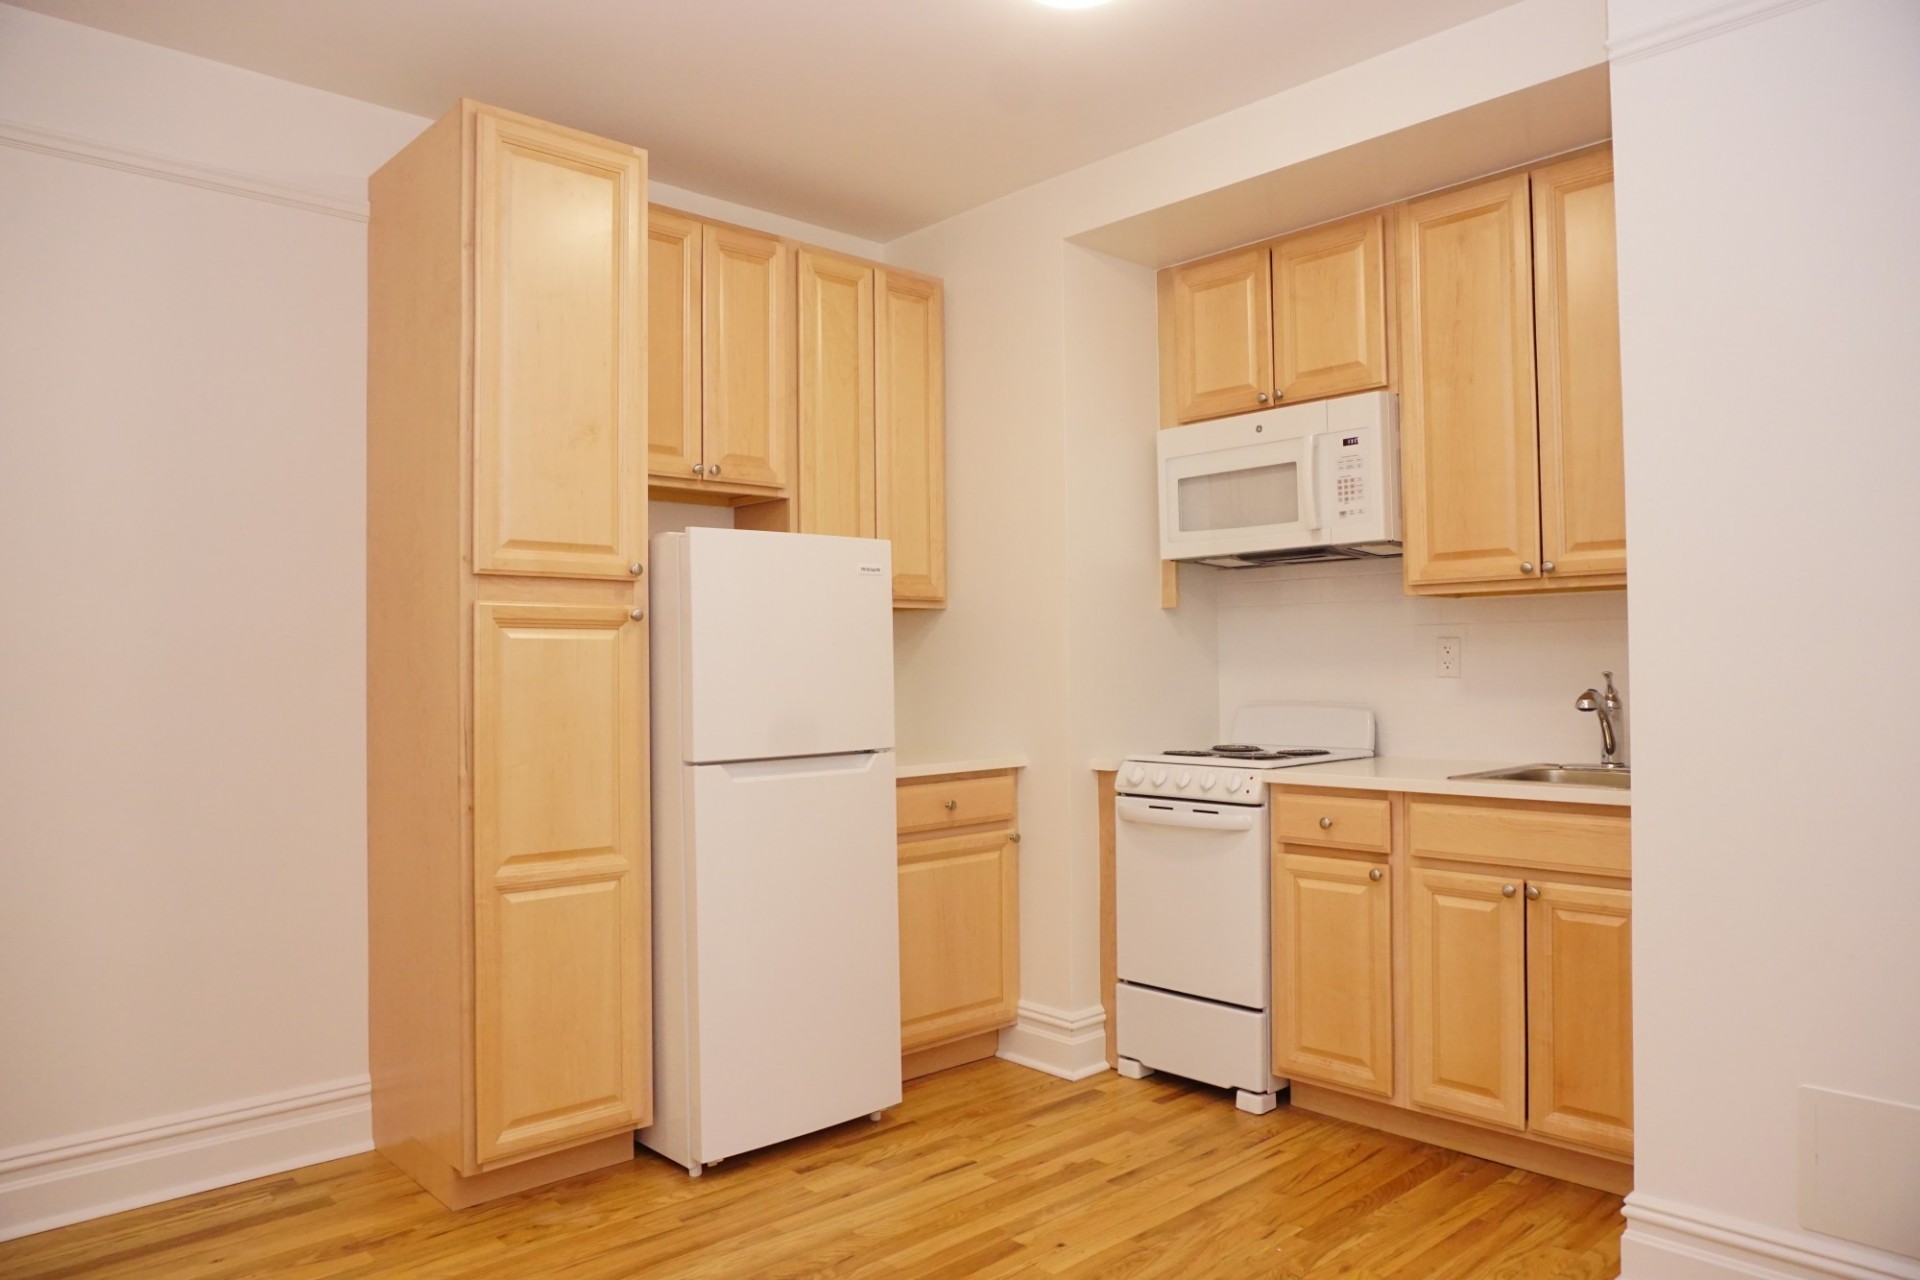 Example of a one-bedroom couple apartment - kitchen and living room view